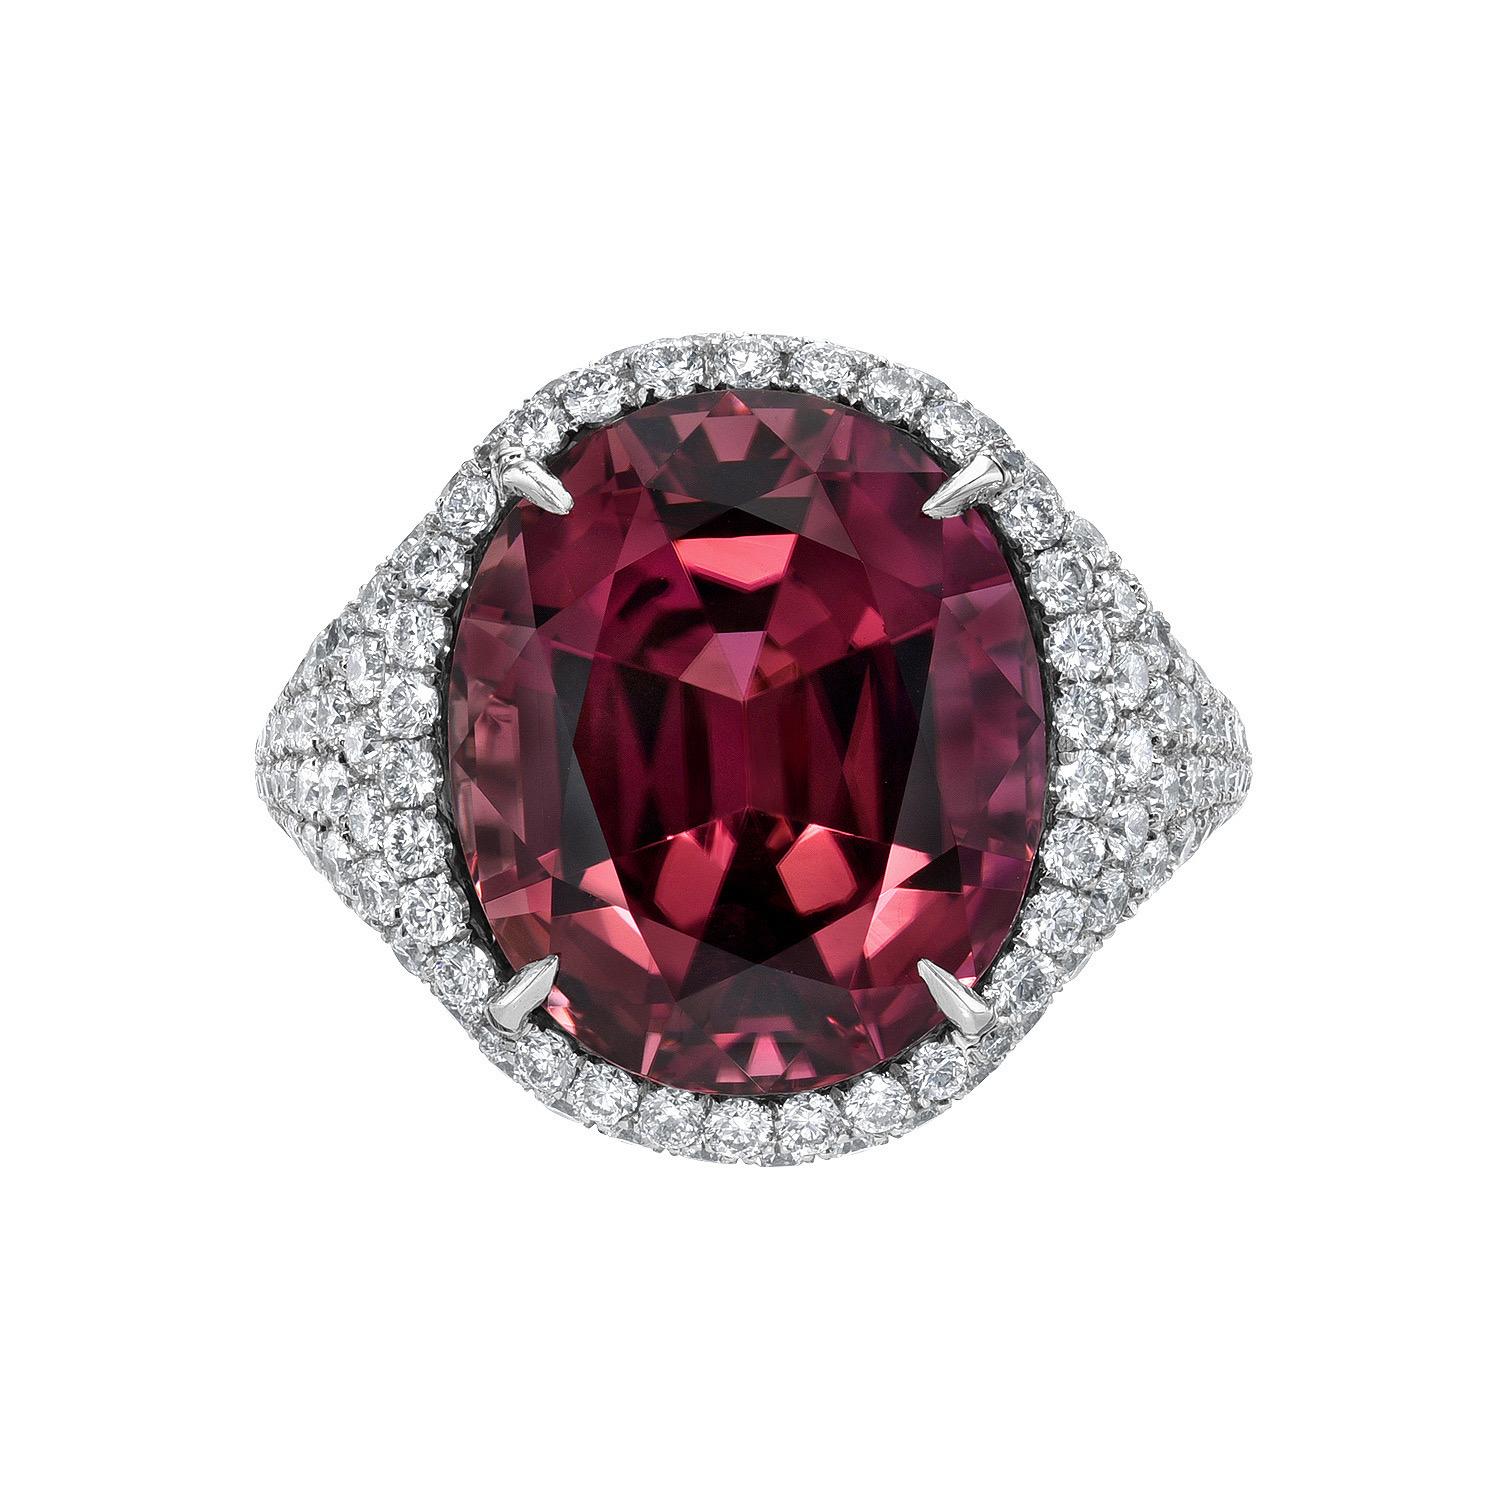 Contemporary Pink Tourmaline Ring 10.43 Carat Oval